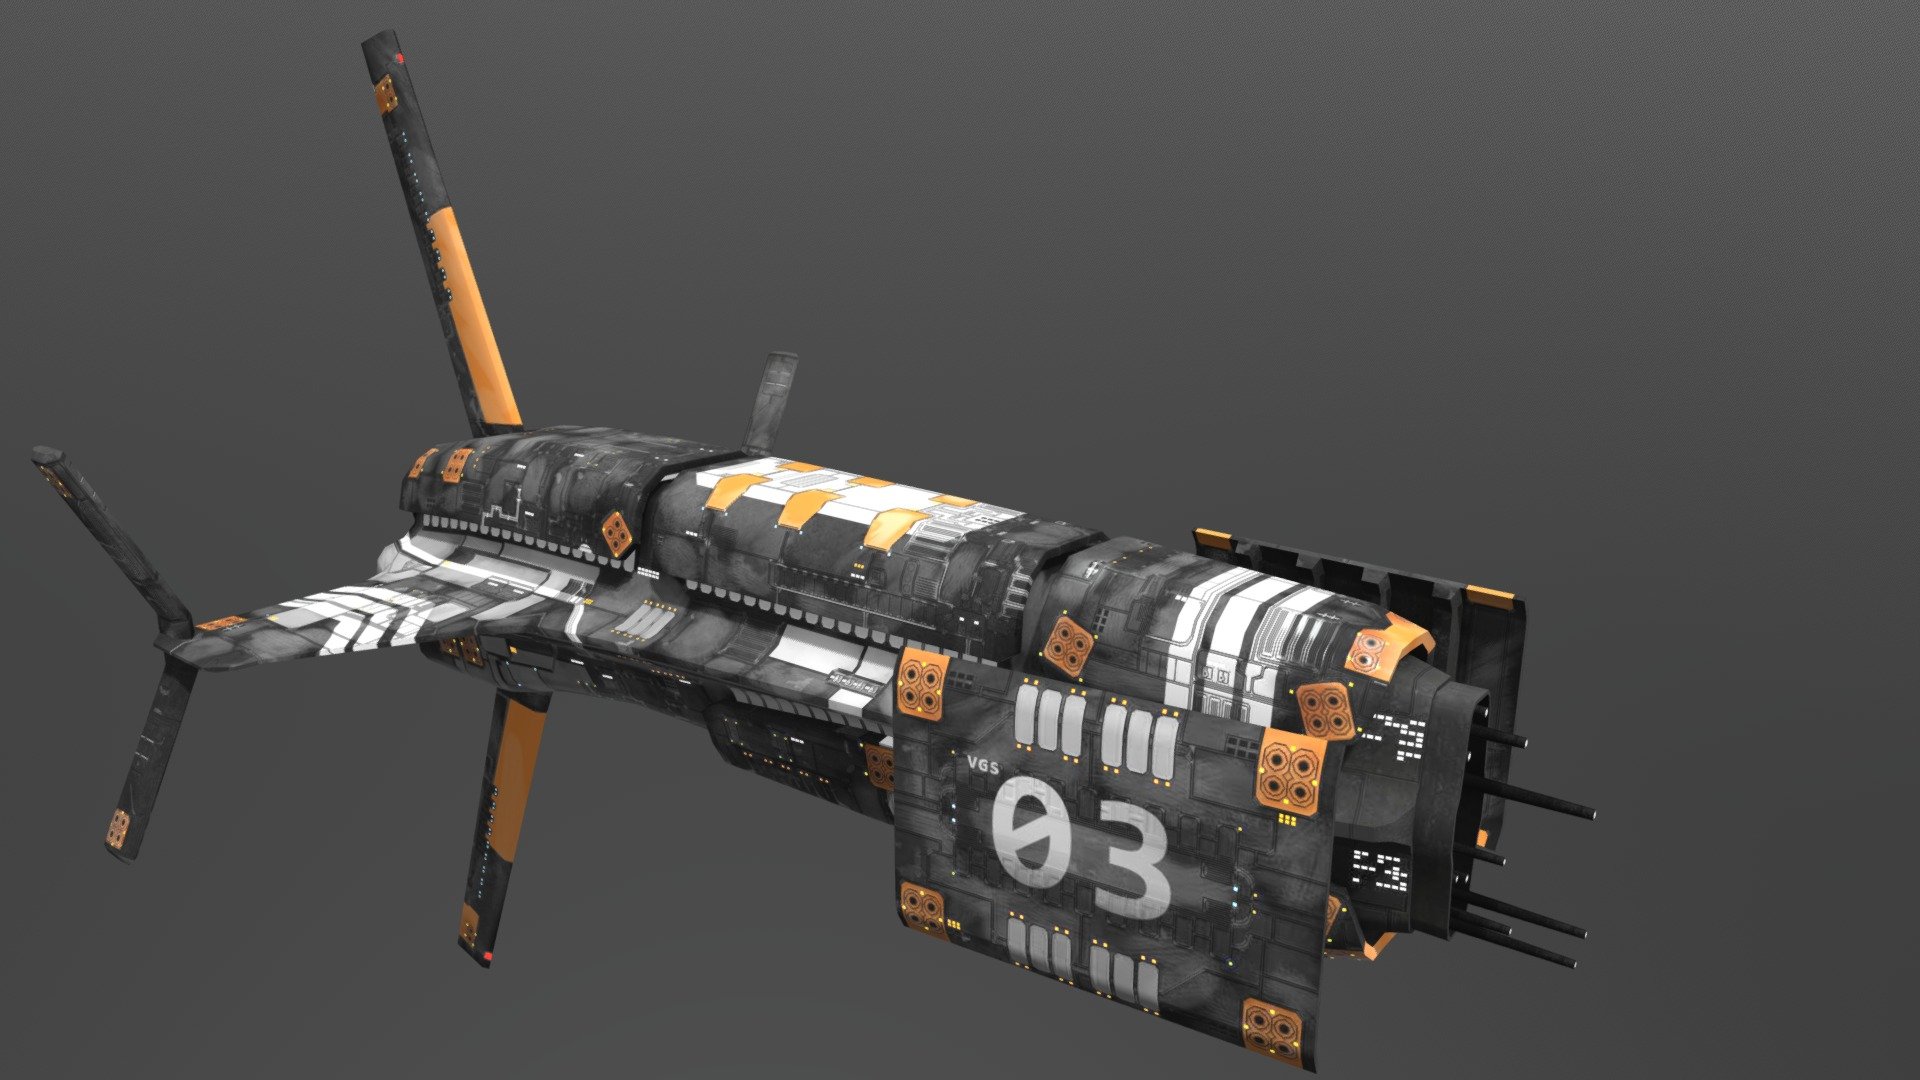 This spaceship was done for contest on The Foundry's website for MODO 3d model